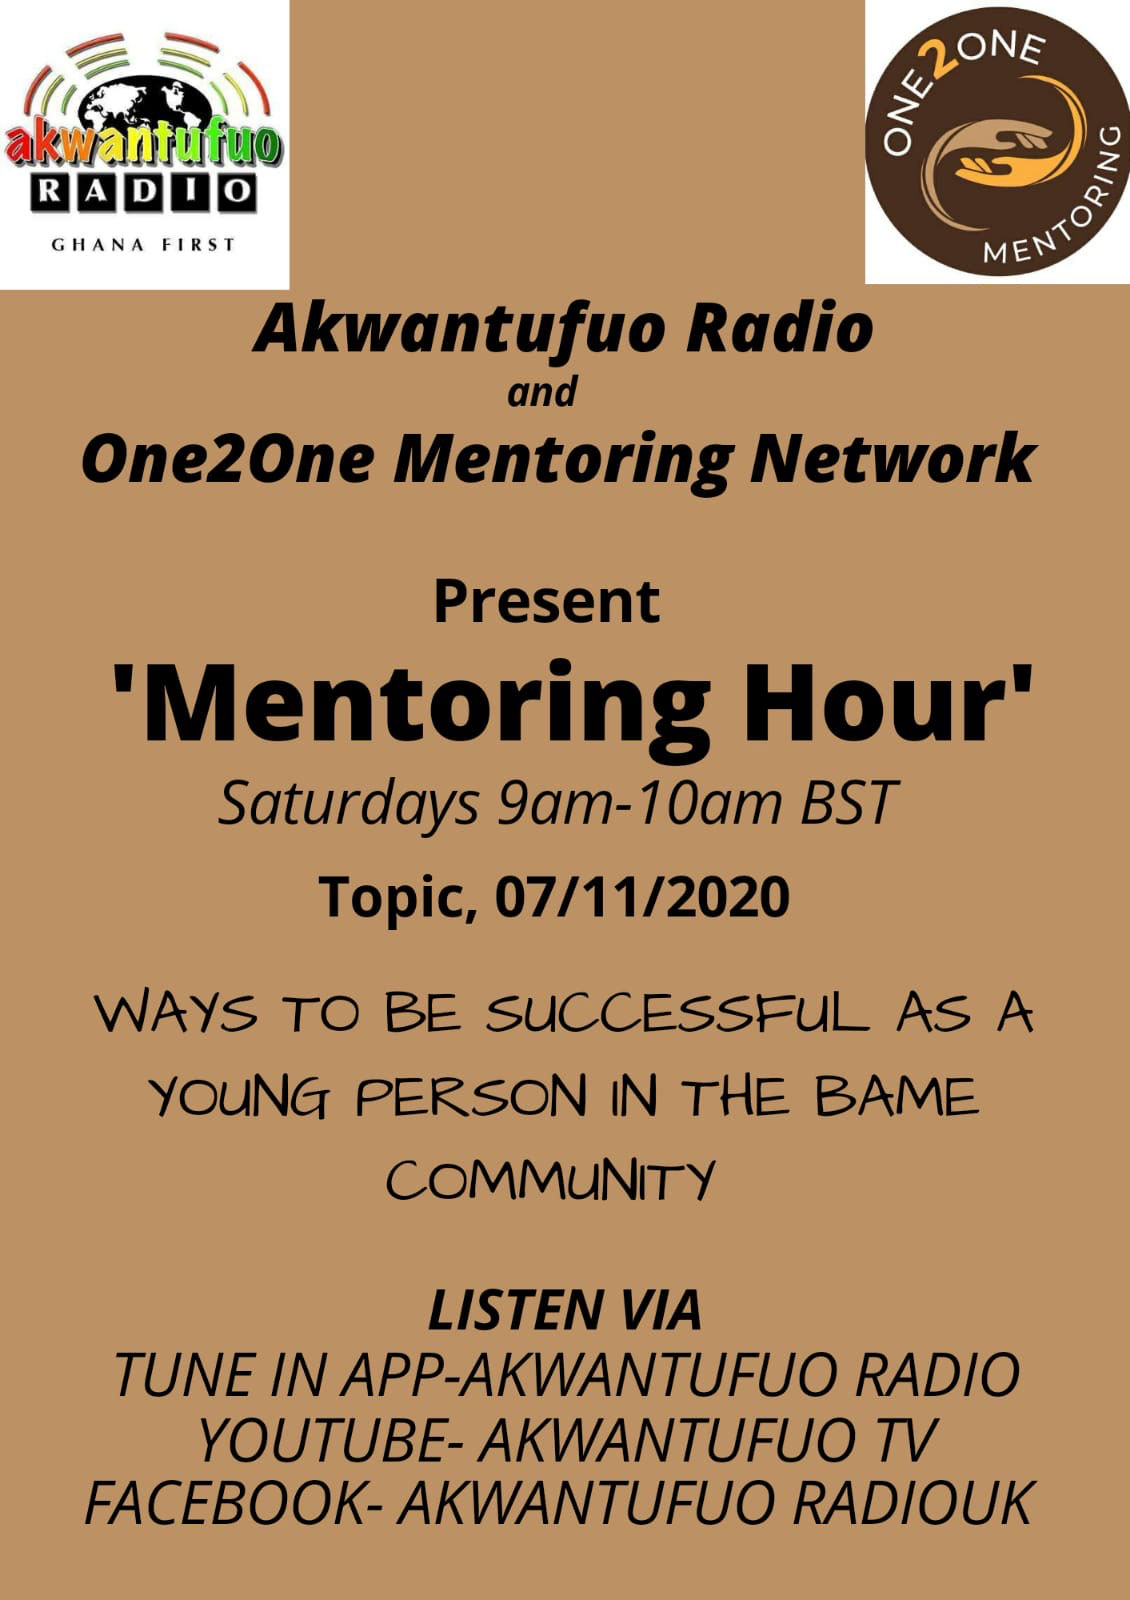 One2One Mentoring Network